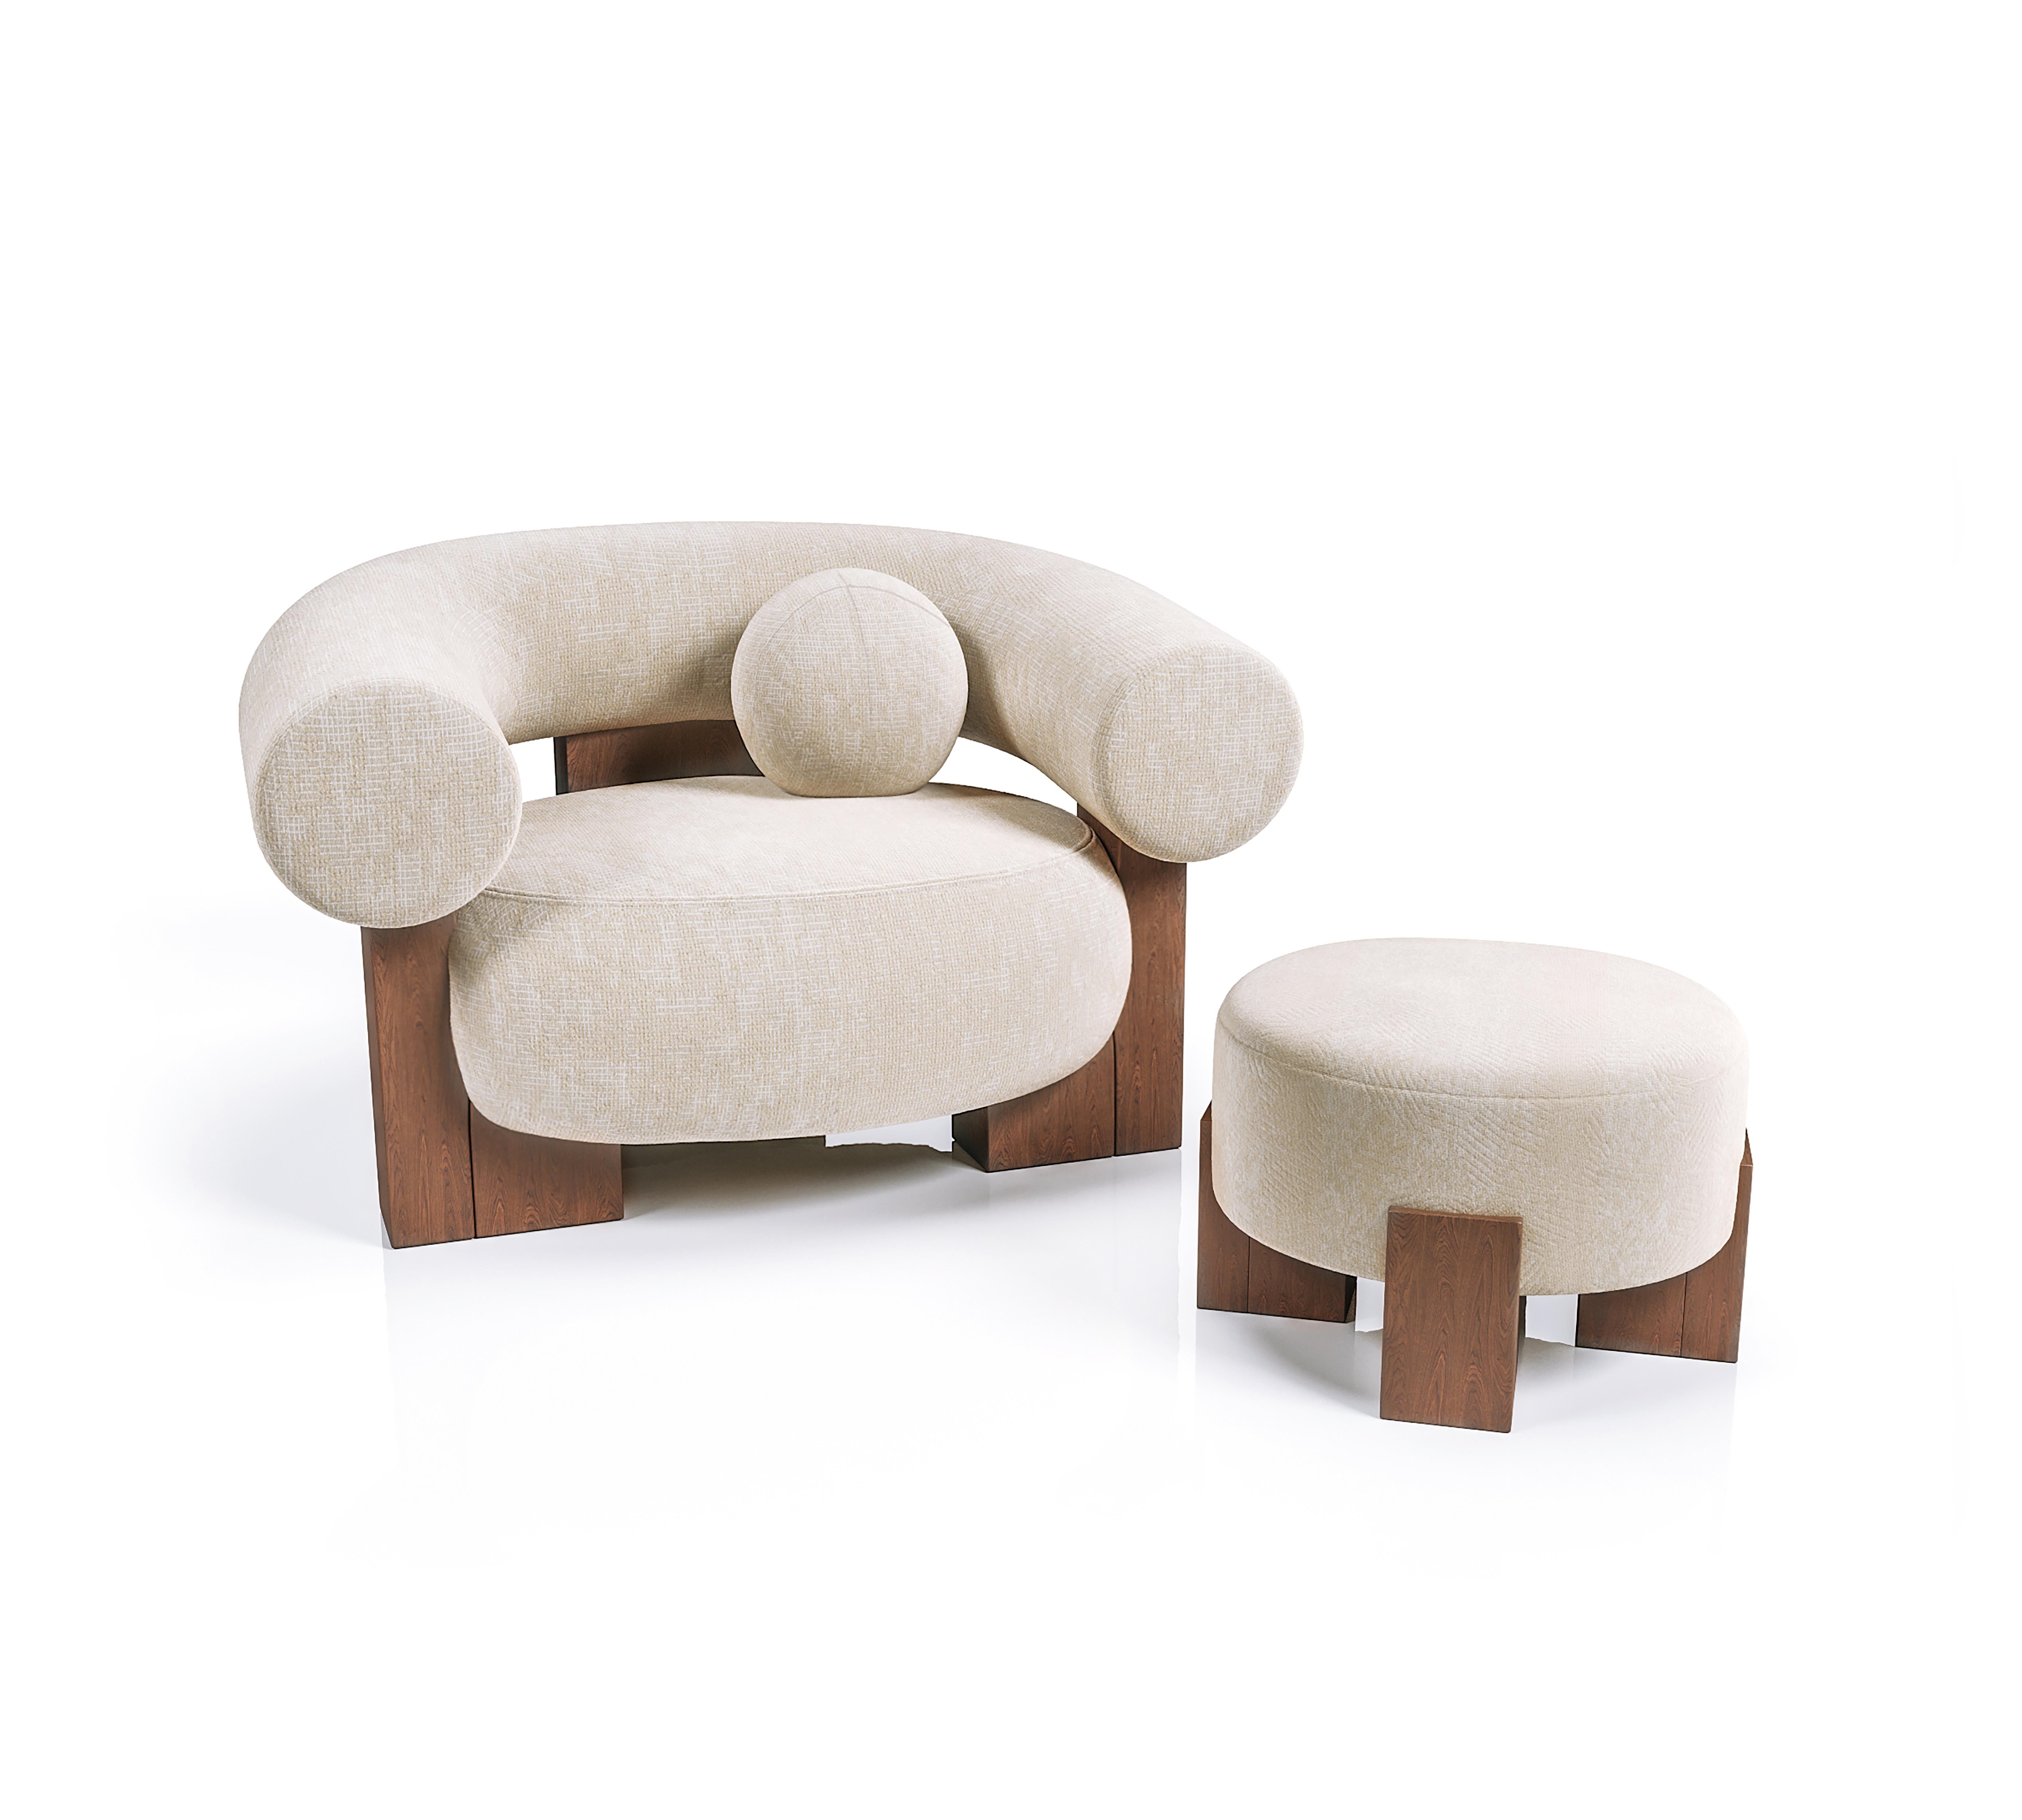 Contemporary Modern Cassete Puff in Fabric & Wood, Set of 2 by Alter Ego for Collector Studio

The piece is underpinned by a Minimalist and sophistication aesthetic of clean lines.

DIMENSIONS
Ø 60 cm  23”
H 38 cm  15”

PRODUCT FEATURES
Structure in